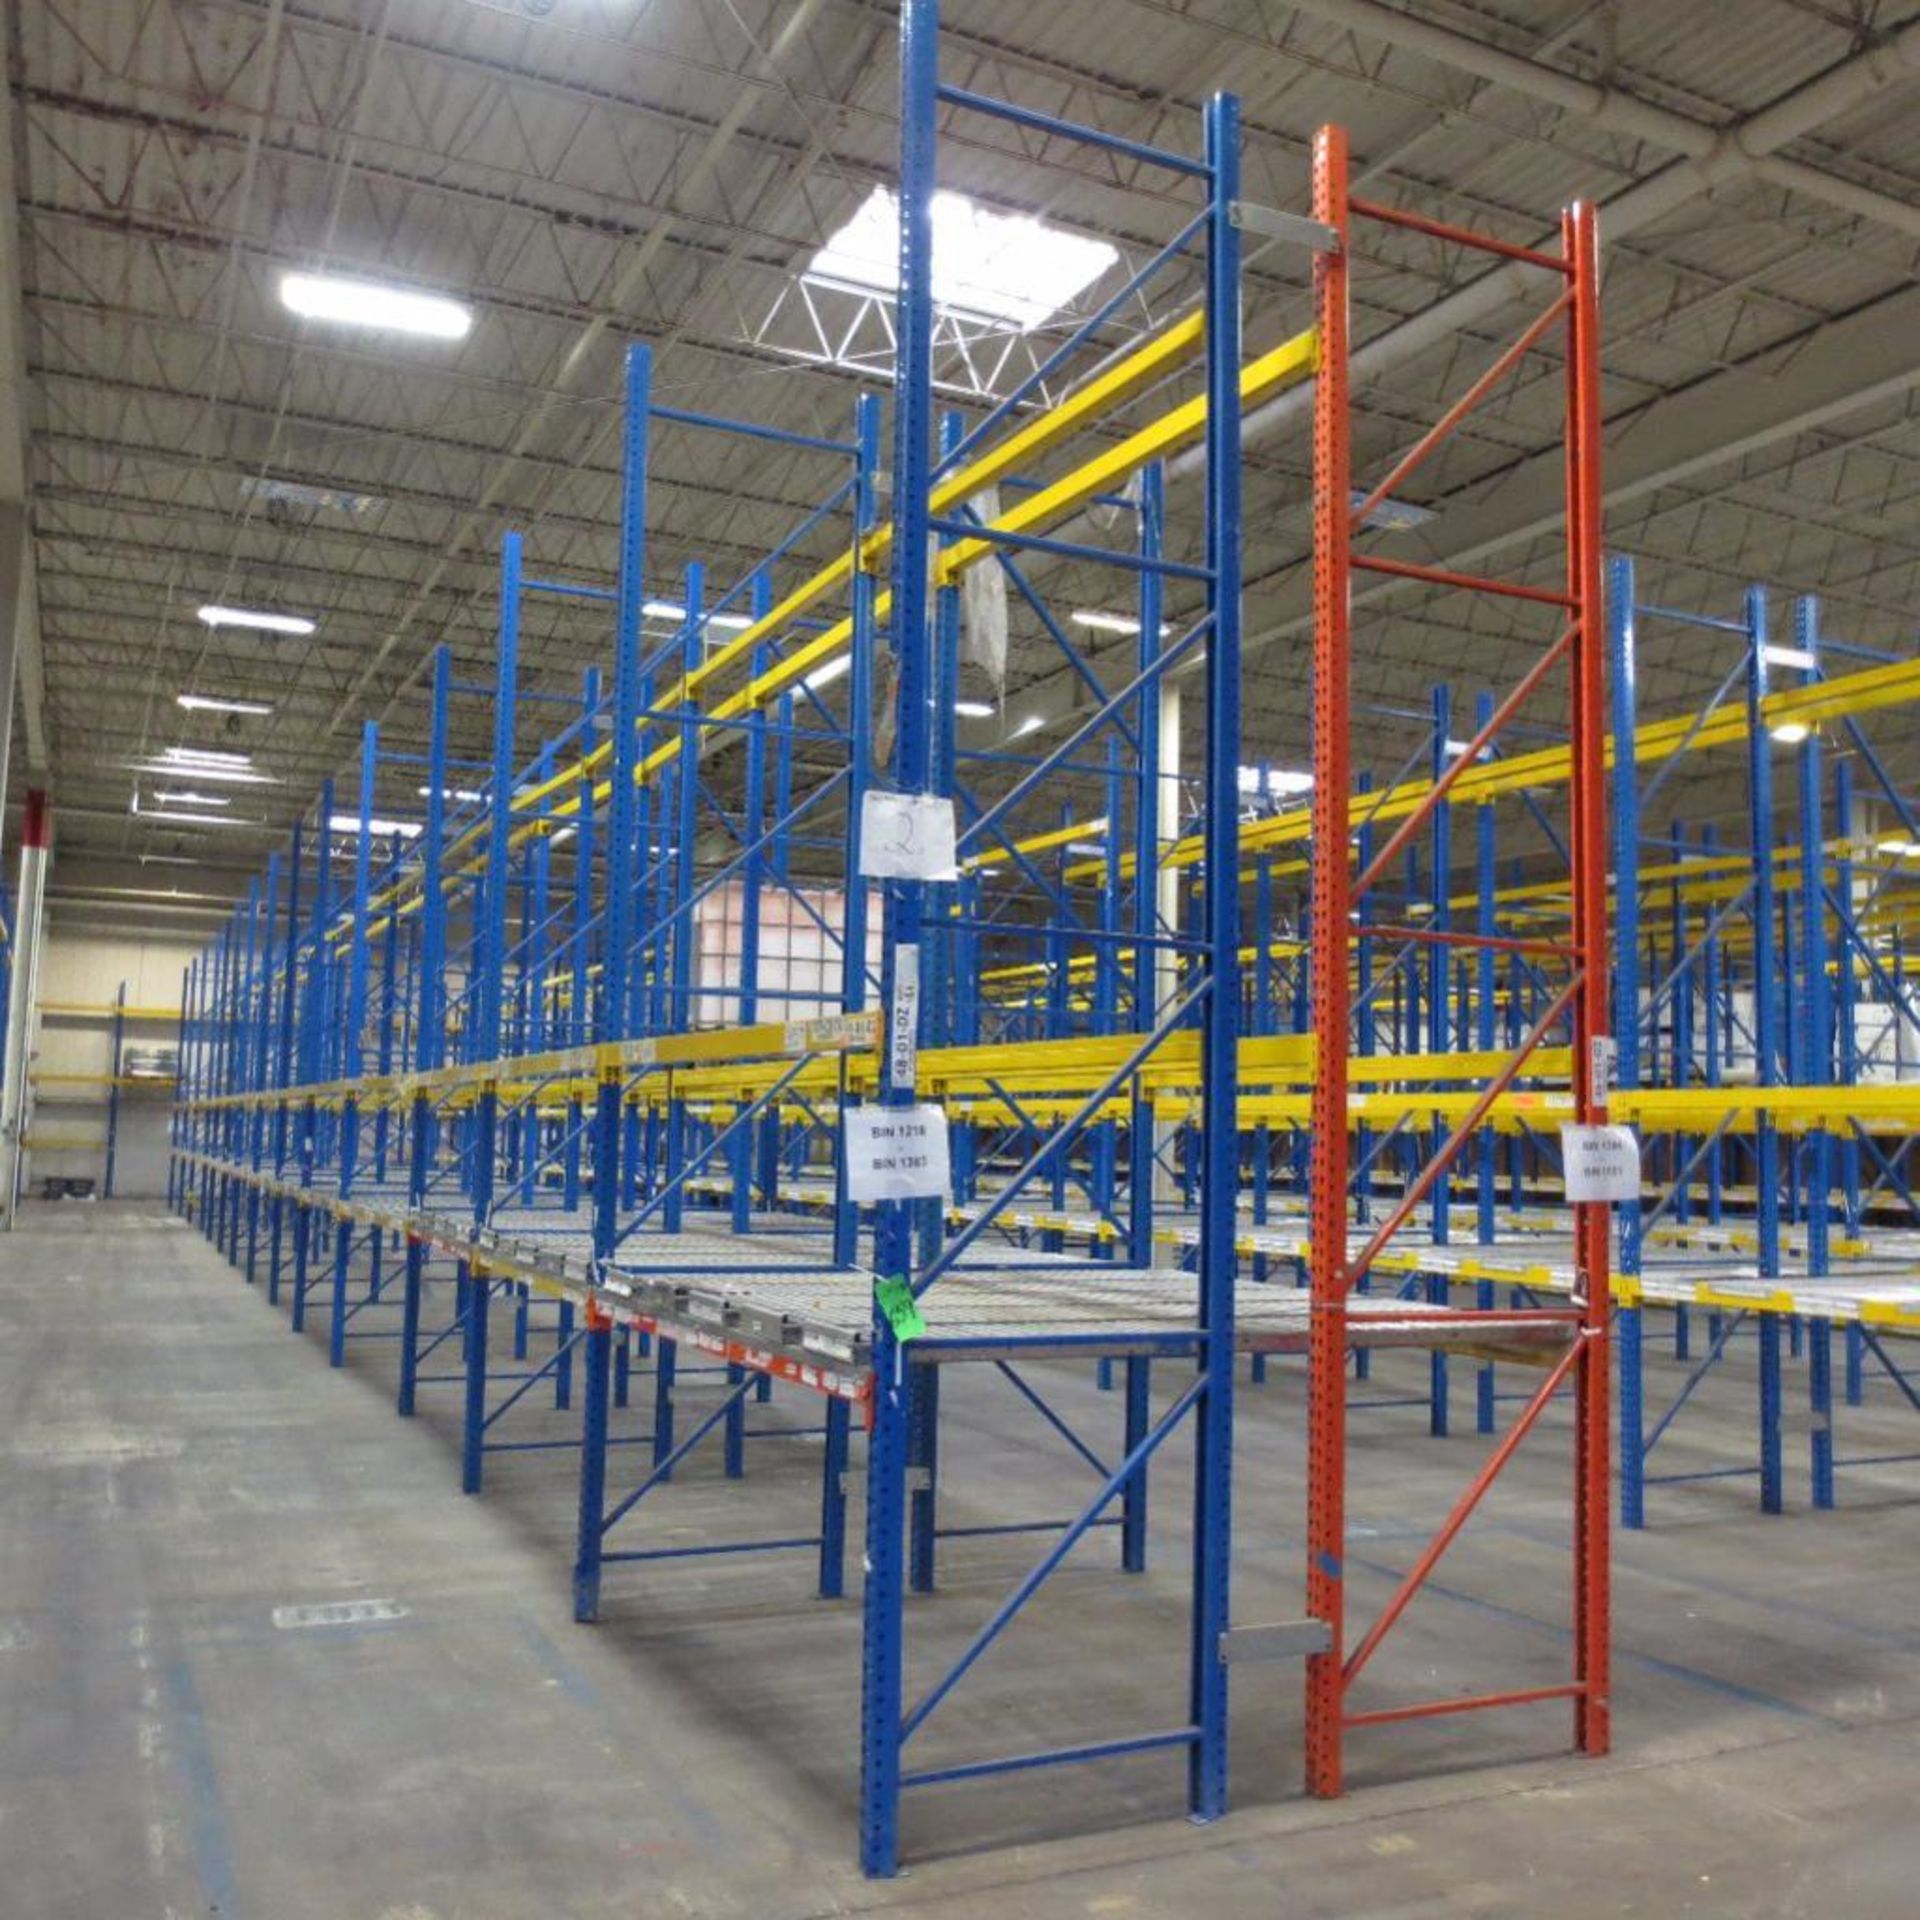 (28) Section of Pallet Racking, (30) Legs 16' X 42", Apx. 111 Cross Beams 8', (70) Pallet Roller Con